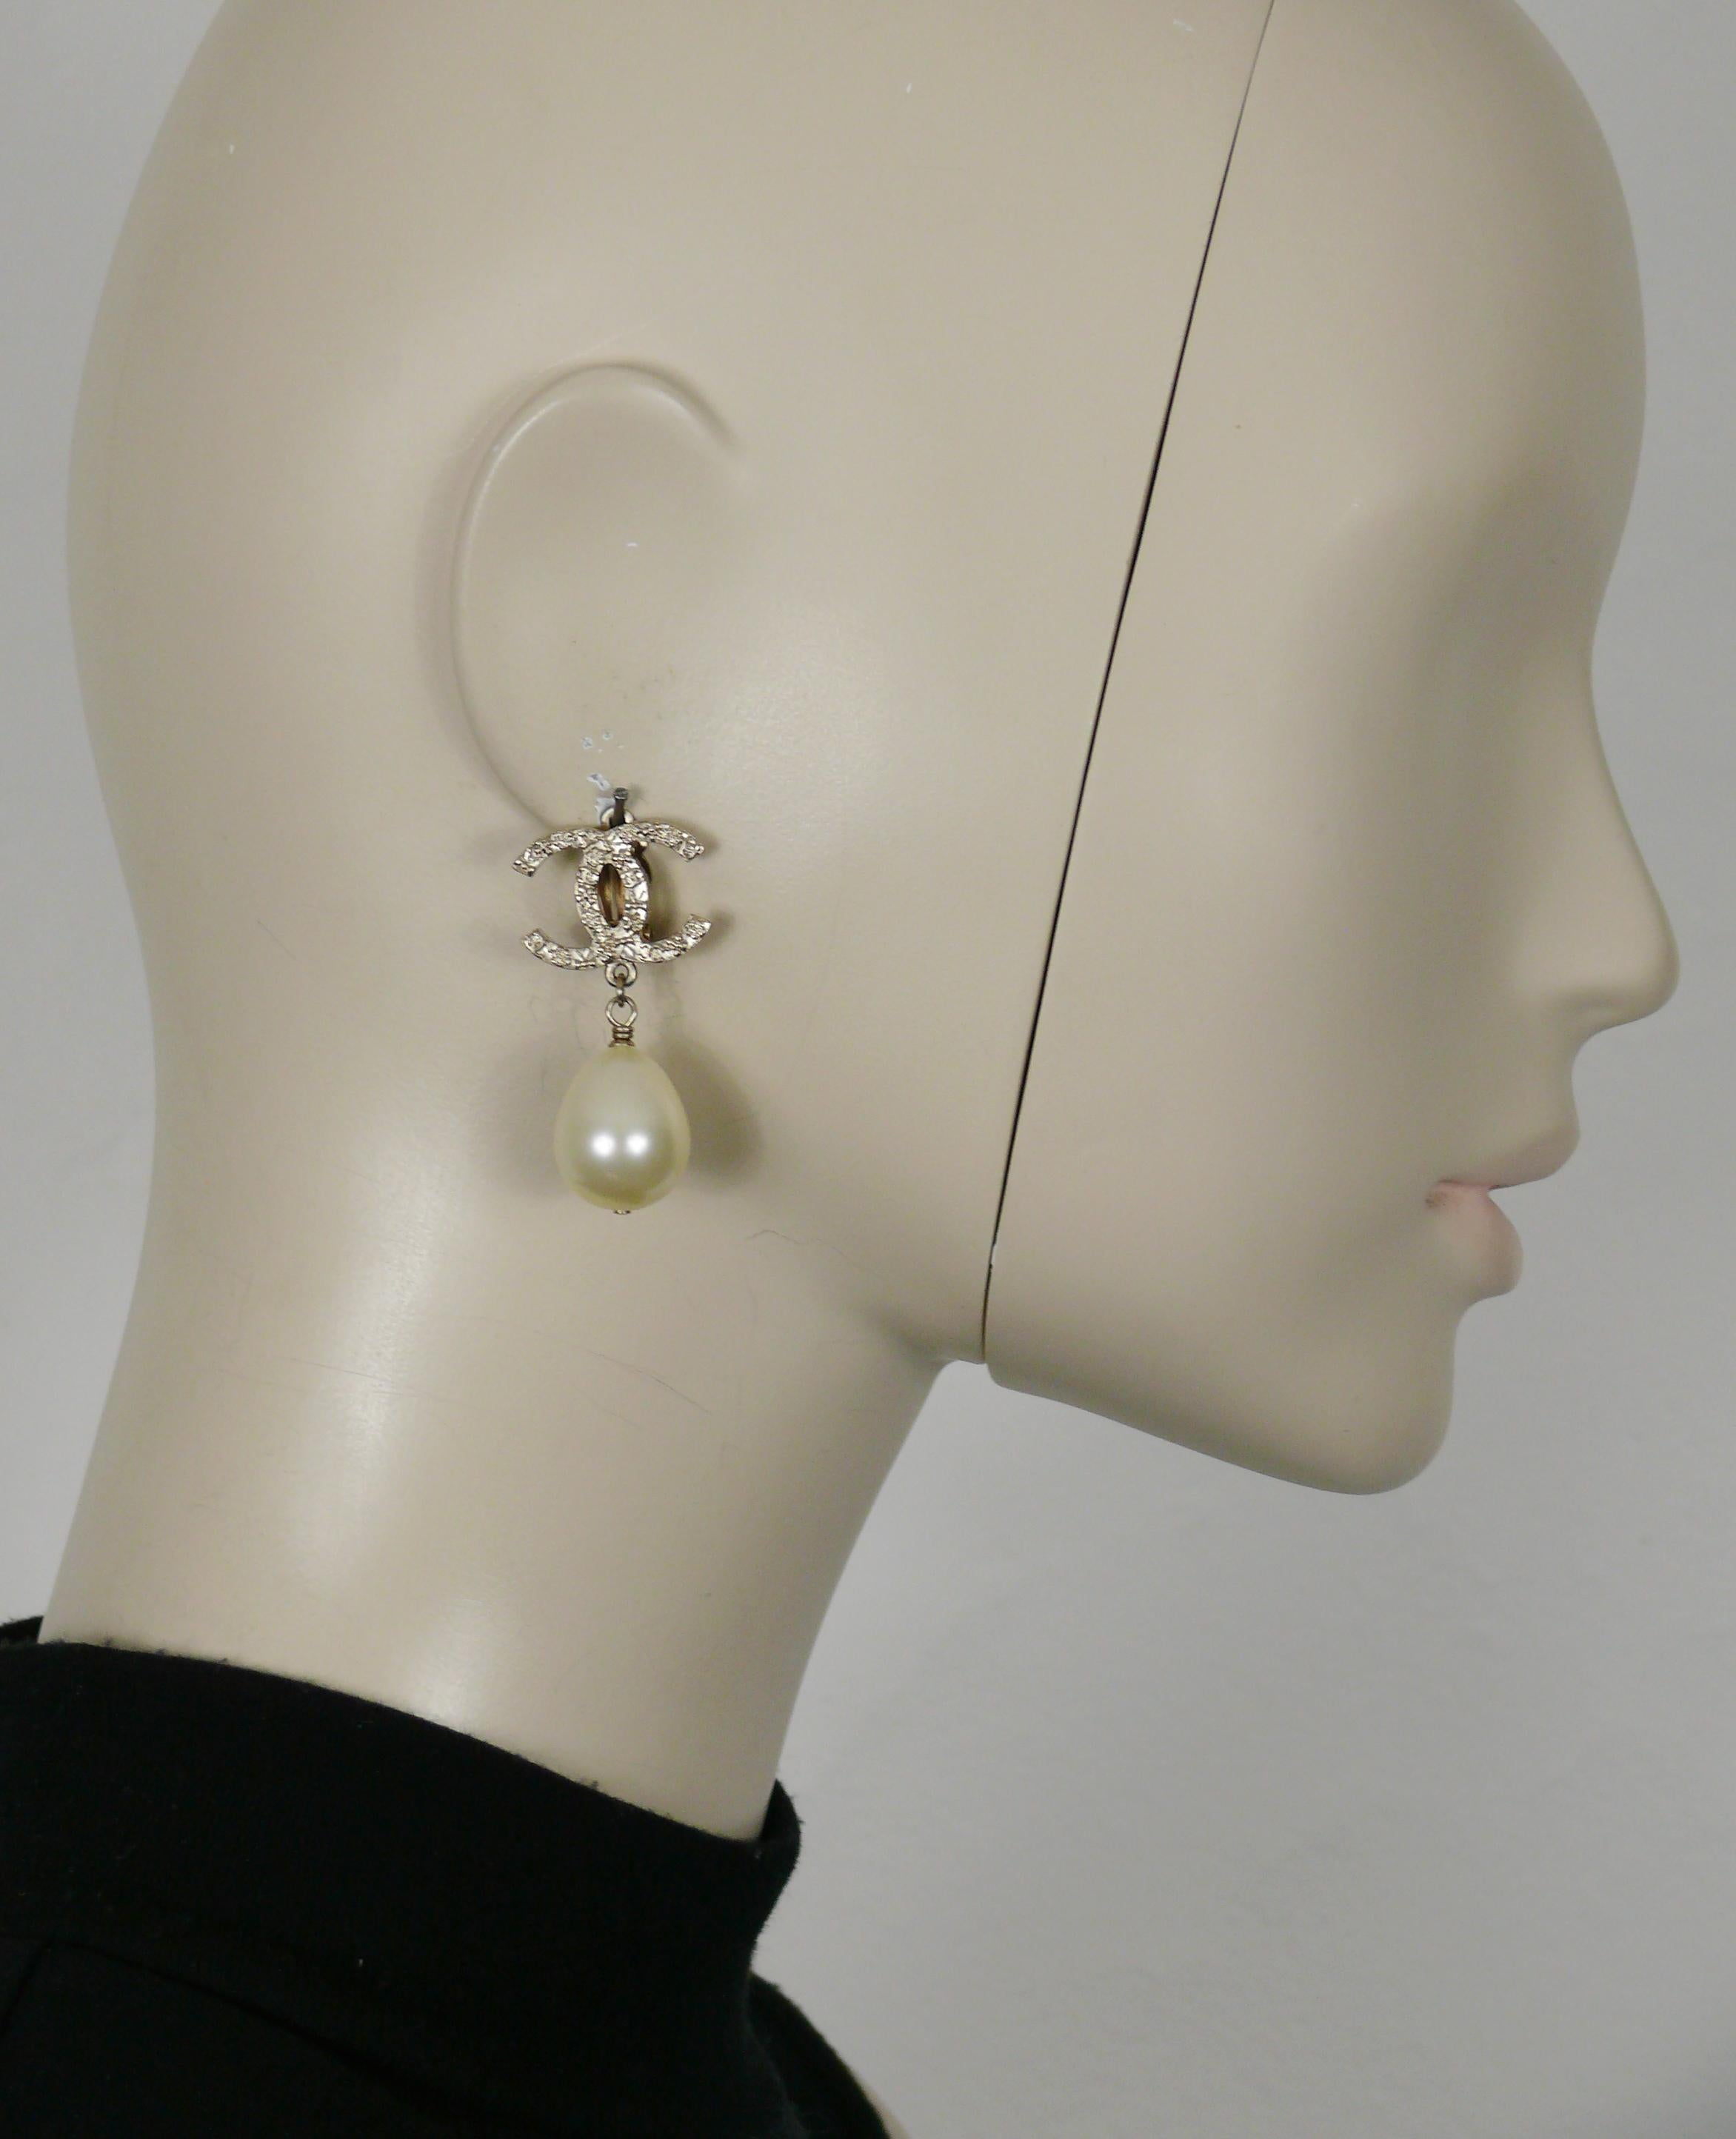 CHANEL pale gold tone CC logo dangling earrings featuring a large faux pearl drop.

Embossed CHANEL G12 A.

Indicative measurements : height approx. 4 cm (1.57 inches) / max width approx. 2.3 cm (0.91 inch).

Weight per earring : approx. 10